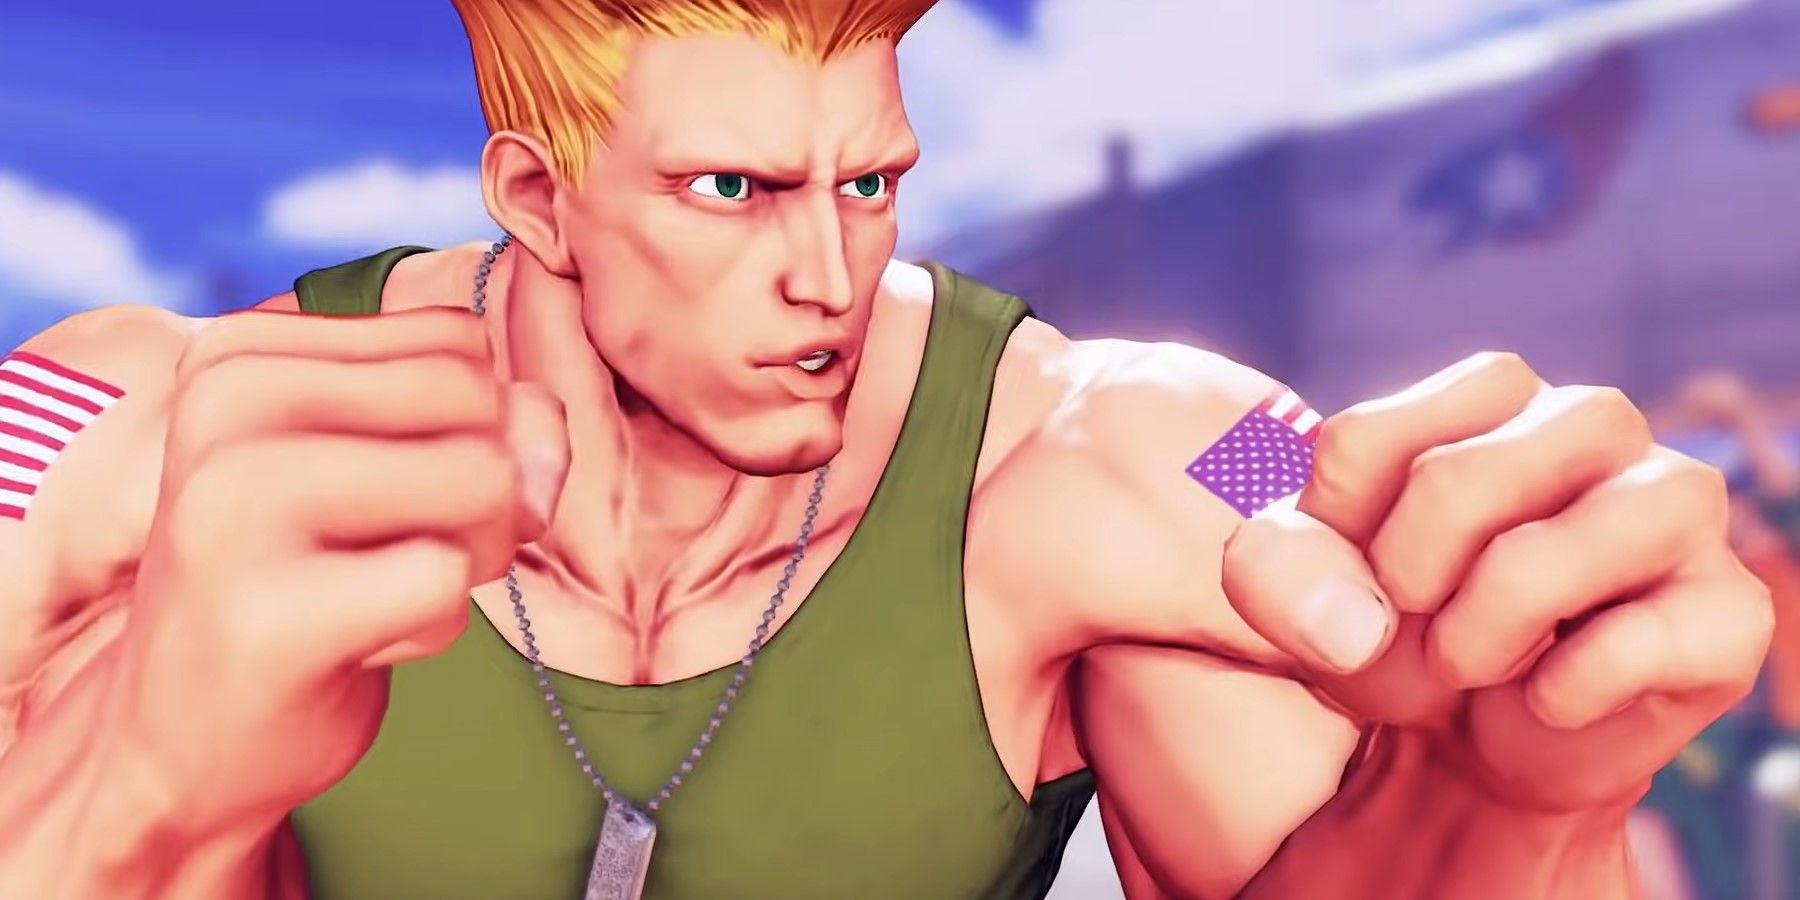 Guile getting into battle stance